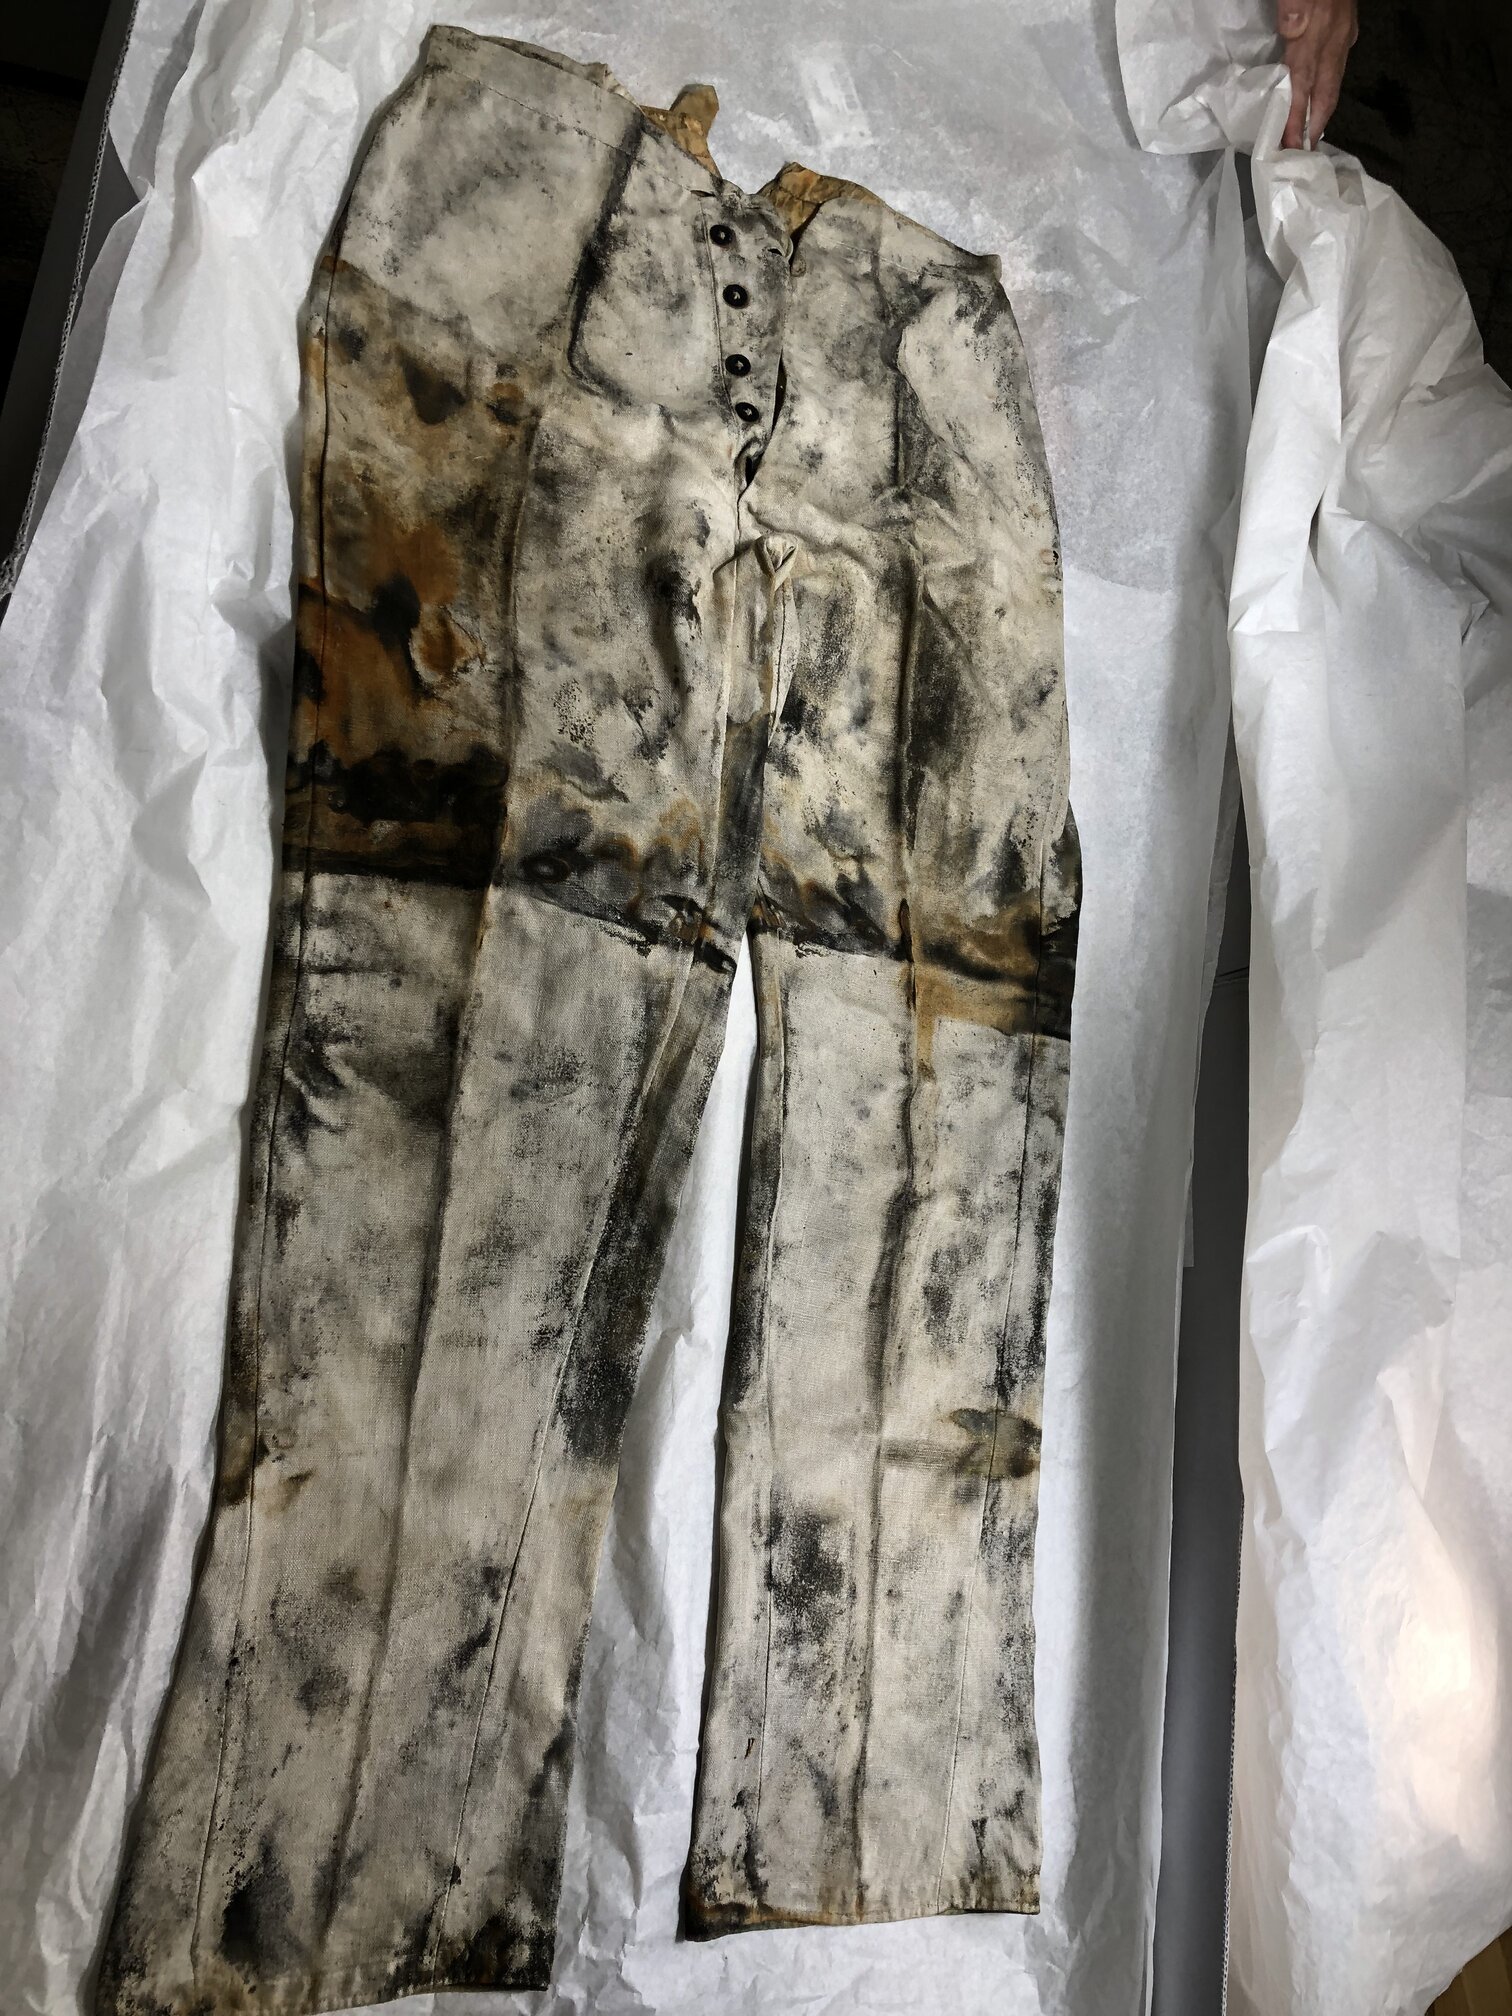 This pair of San Francisco Gold Rush jeans, recovered from the wreck of the SS Central America, is the oldest known example of its kind and may have been made by Levi Strauss in his early years in business. Photo credit: Holabird Western Americana Collections.